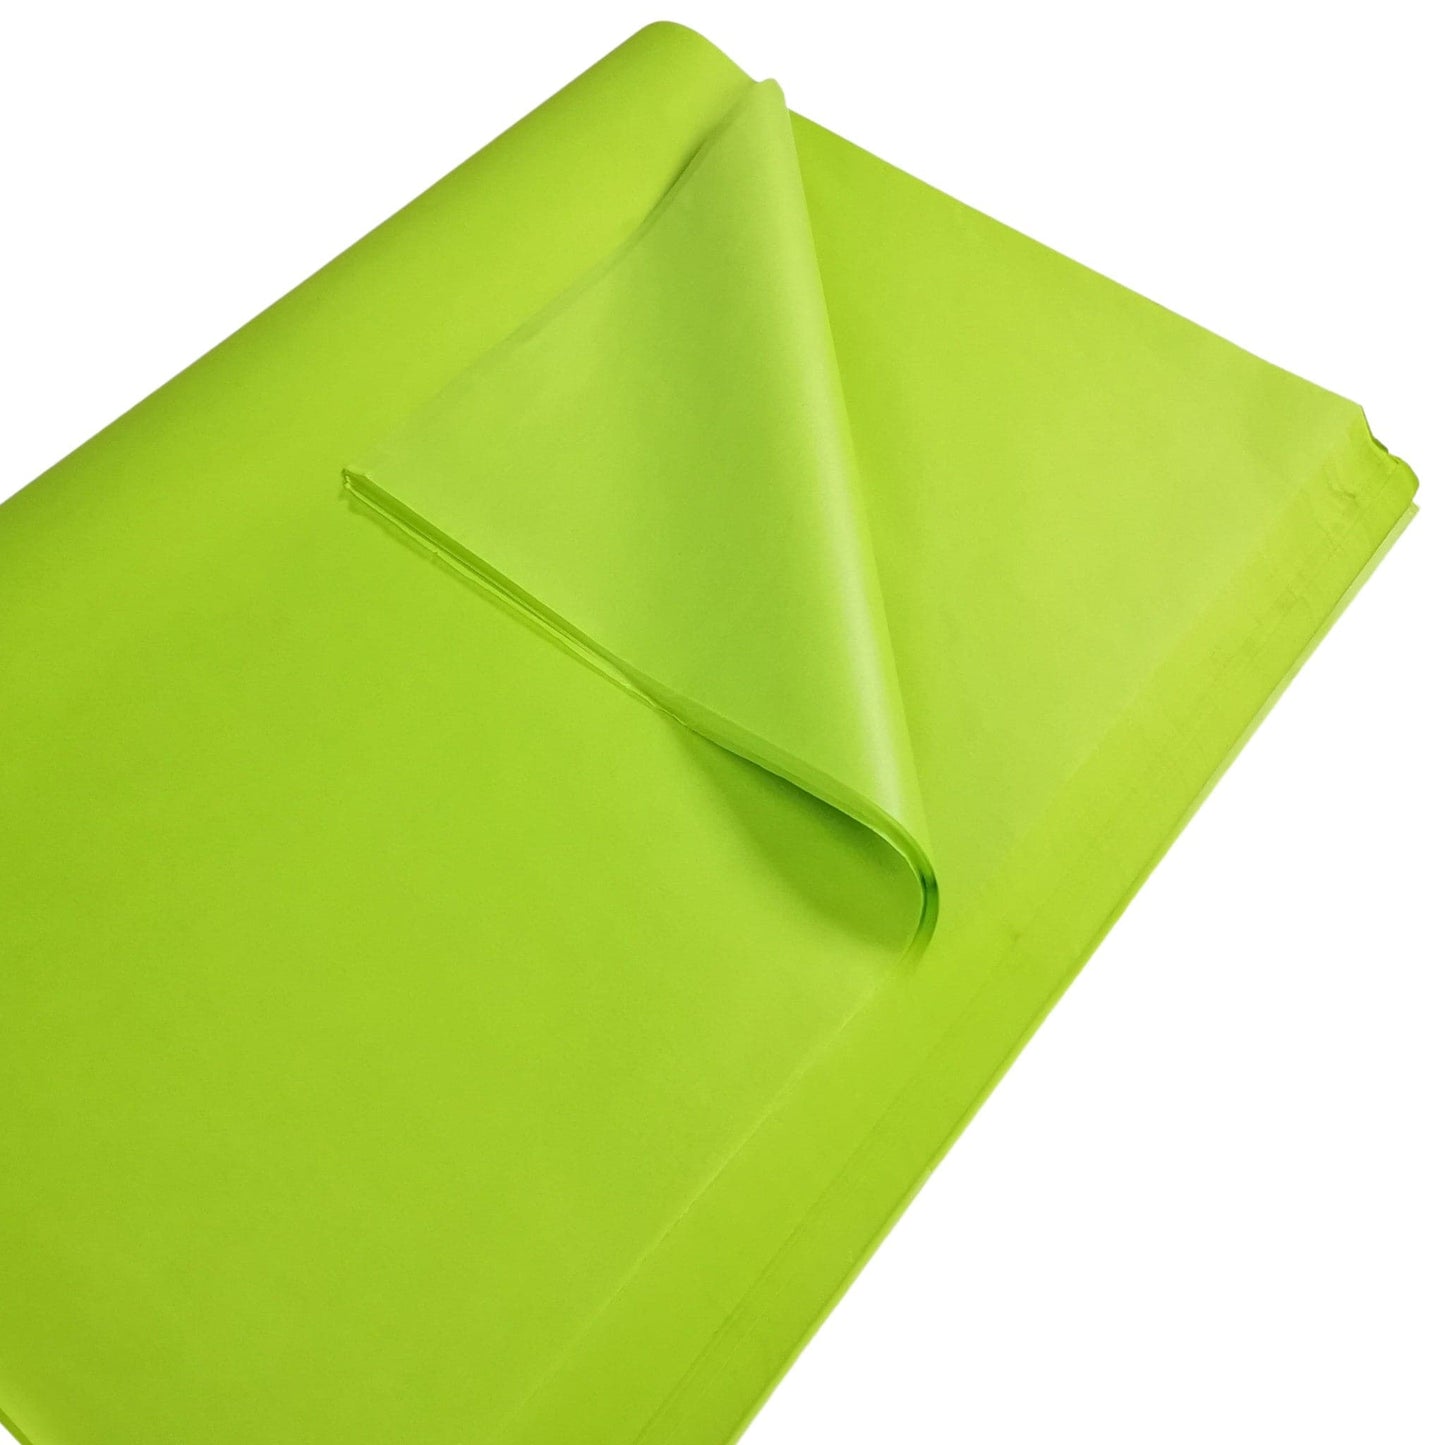 Tissue Paper Sheets 50cm x 75cm 17gsm Lime Green